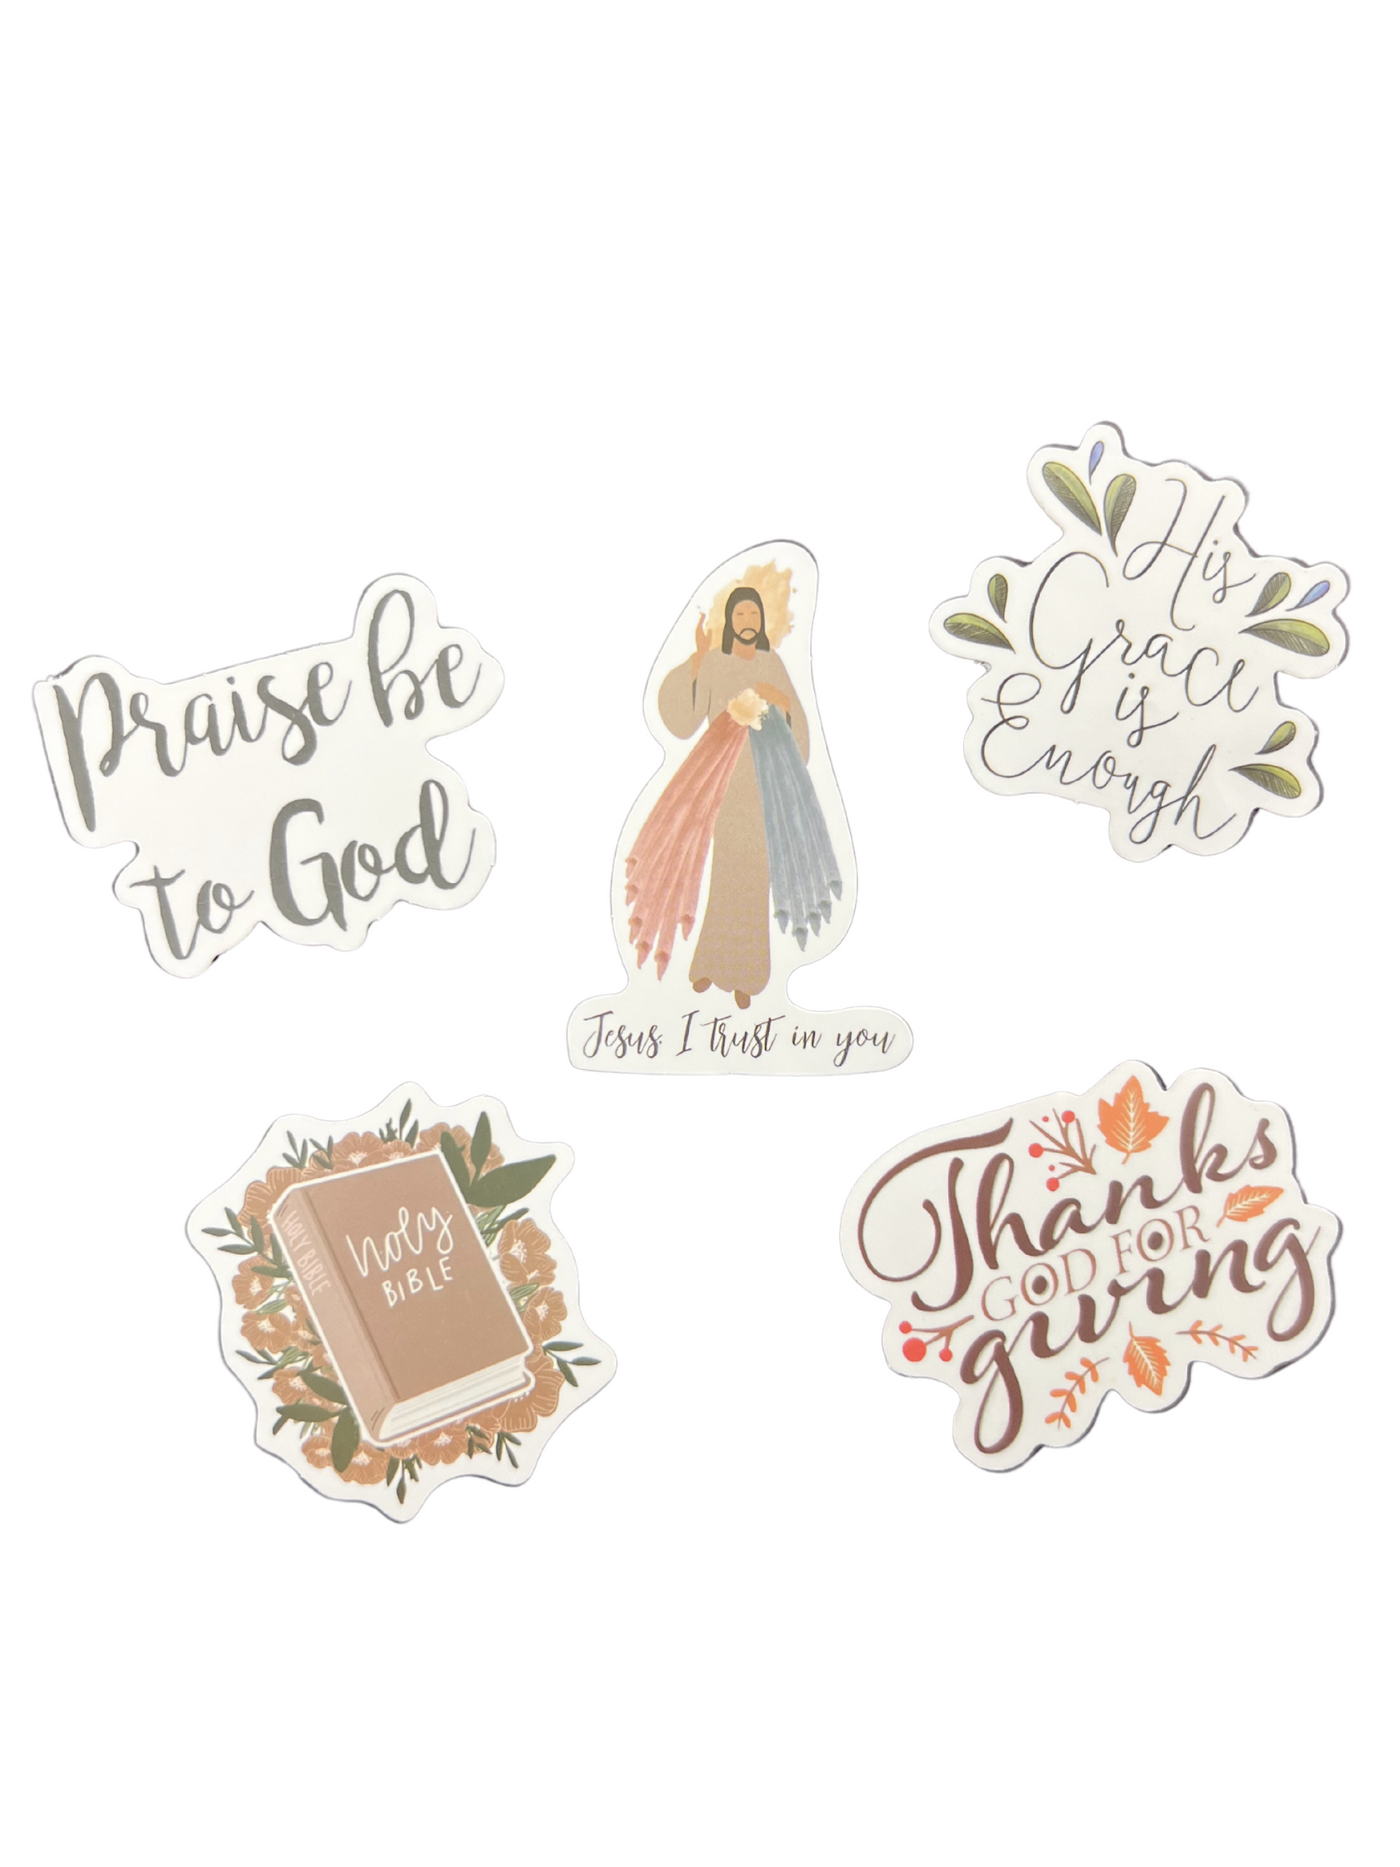 Set of 5 Christian stickers in neutral on white background.